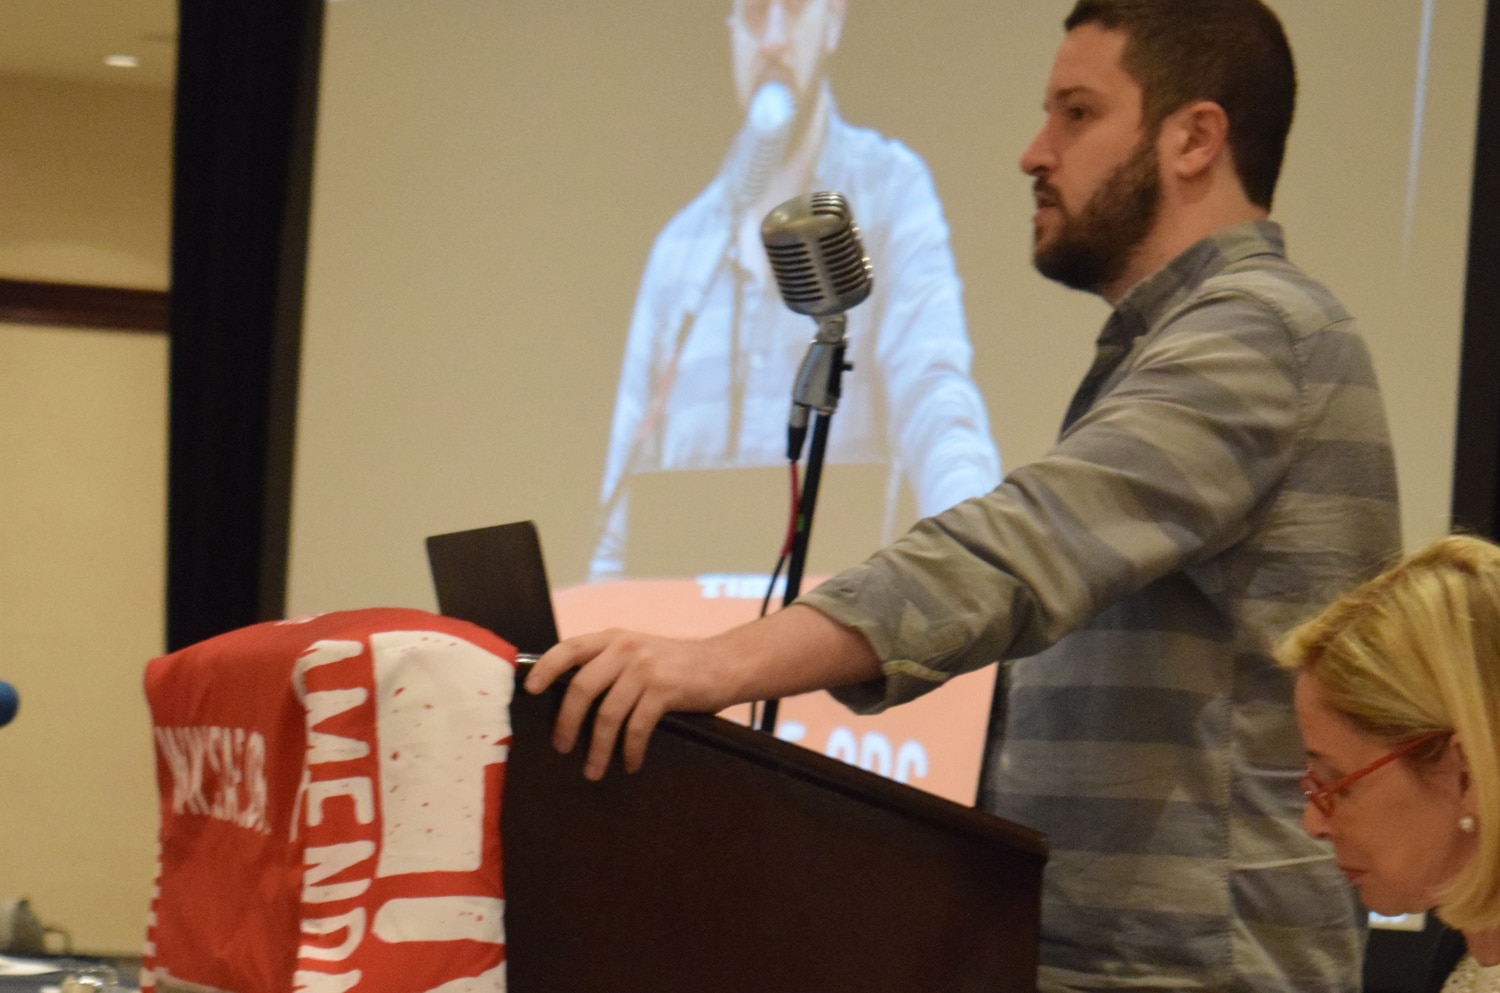 Cody Wilson, president of Defense Distributed, updated the audience about his company's lawsuit over 3D printed guns against the State Department as well as the evolution of the topic. (Photo: Christen Smith/Guns.com)